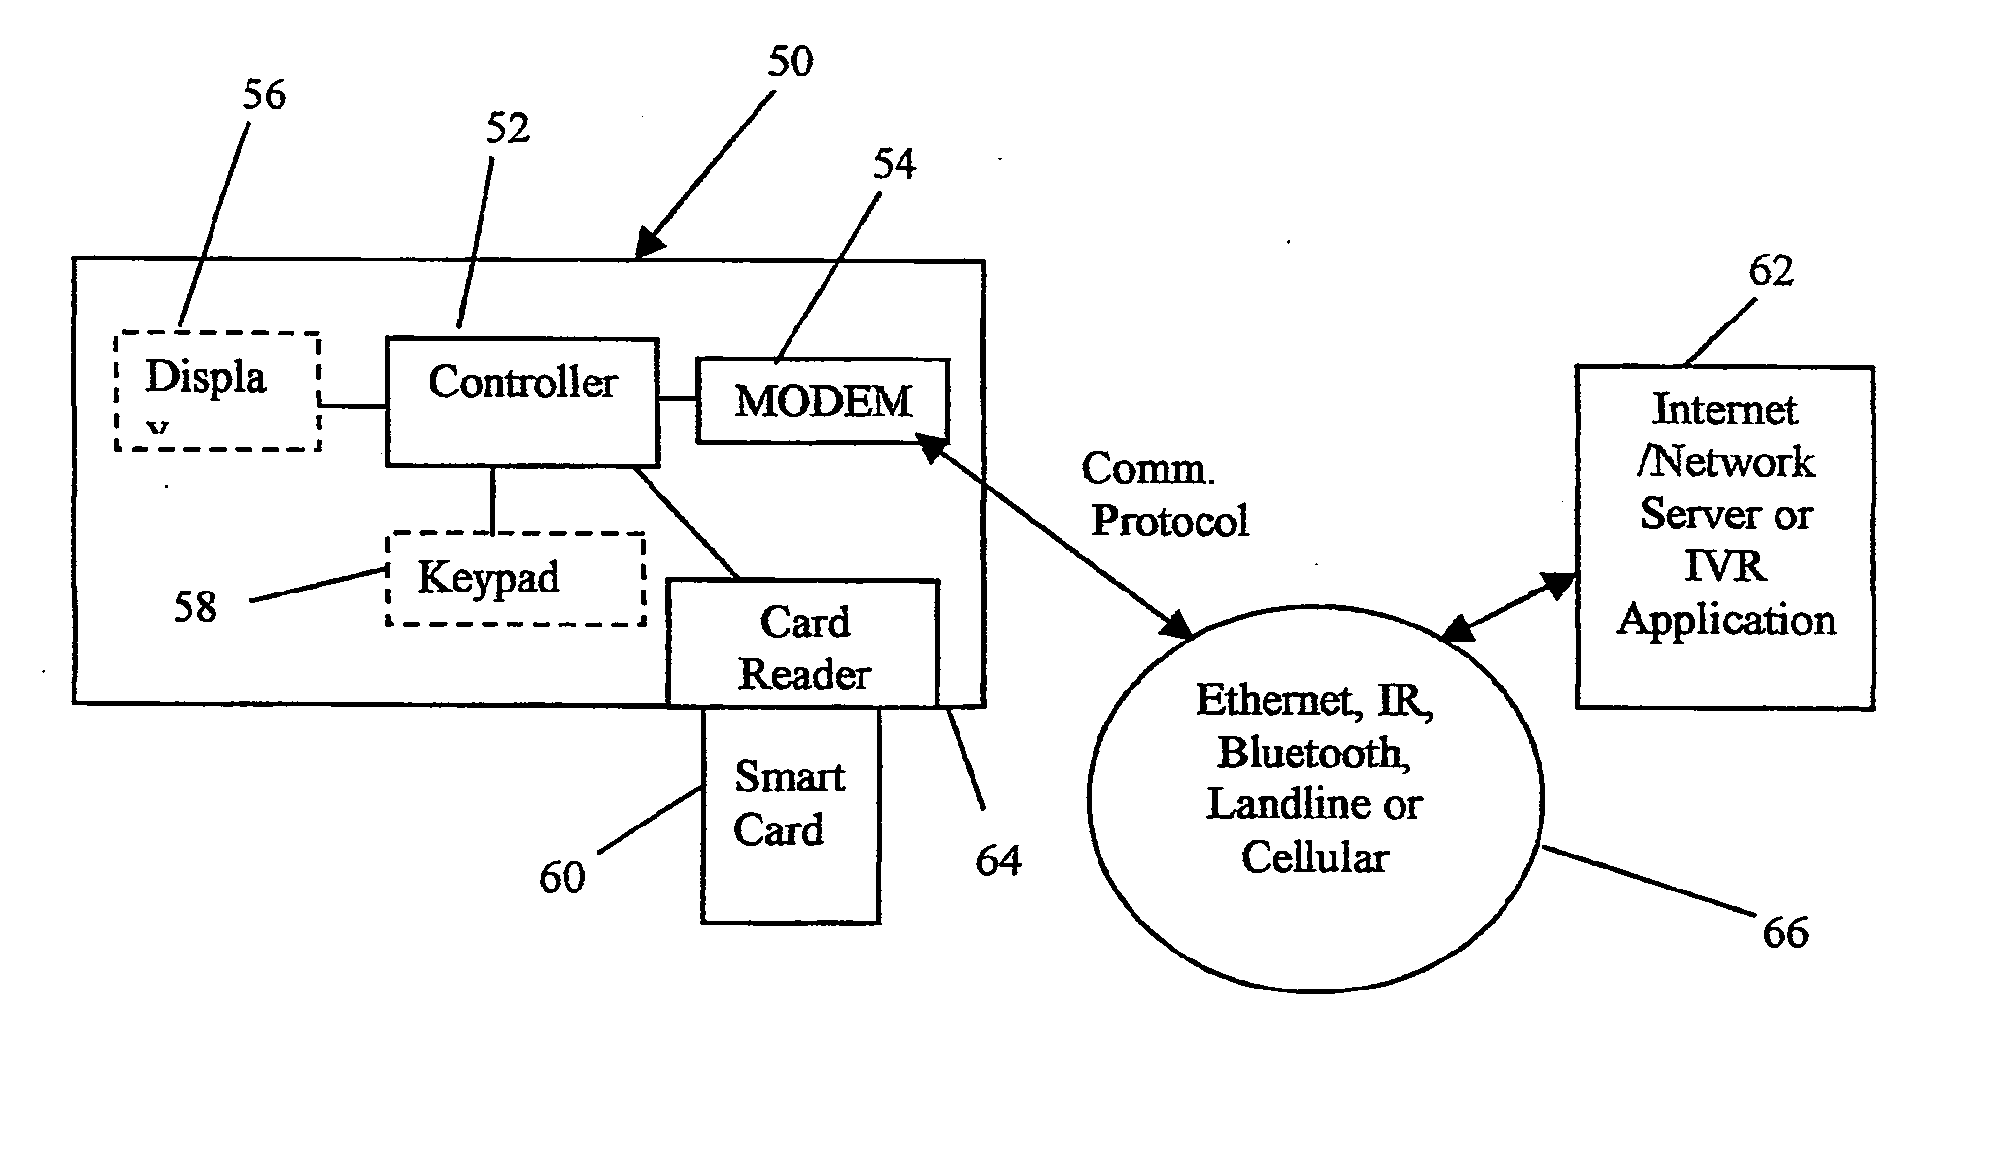 Smart card network interface device